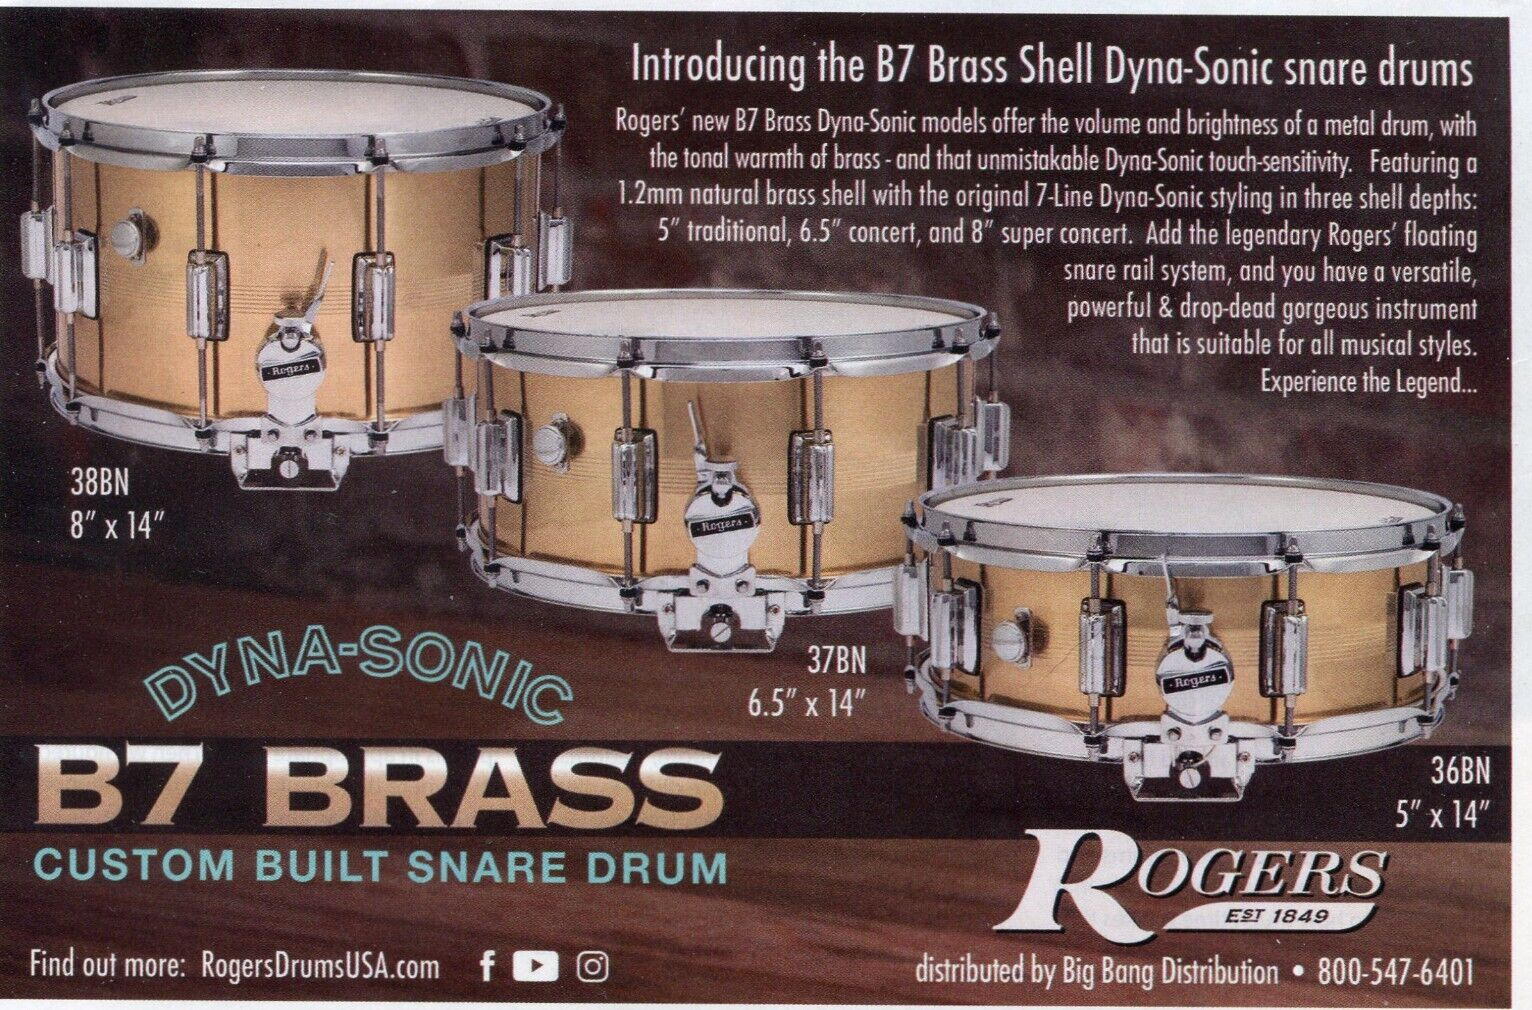 2020 small Print Ad of Rogers Dyna-Sonic B7 Brass Custom Built Snare Drums